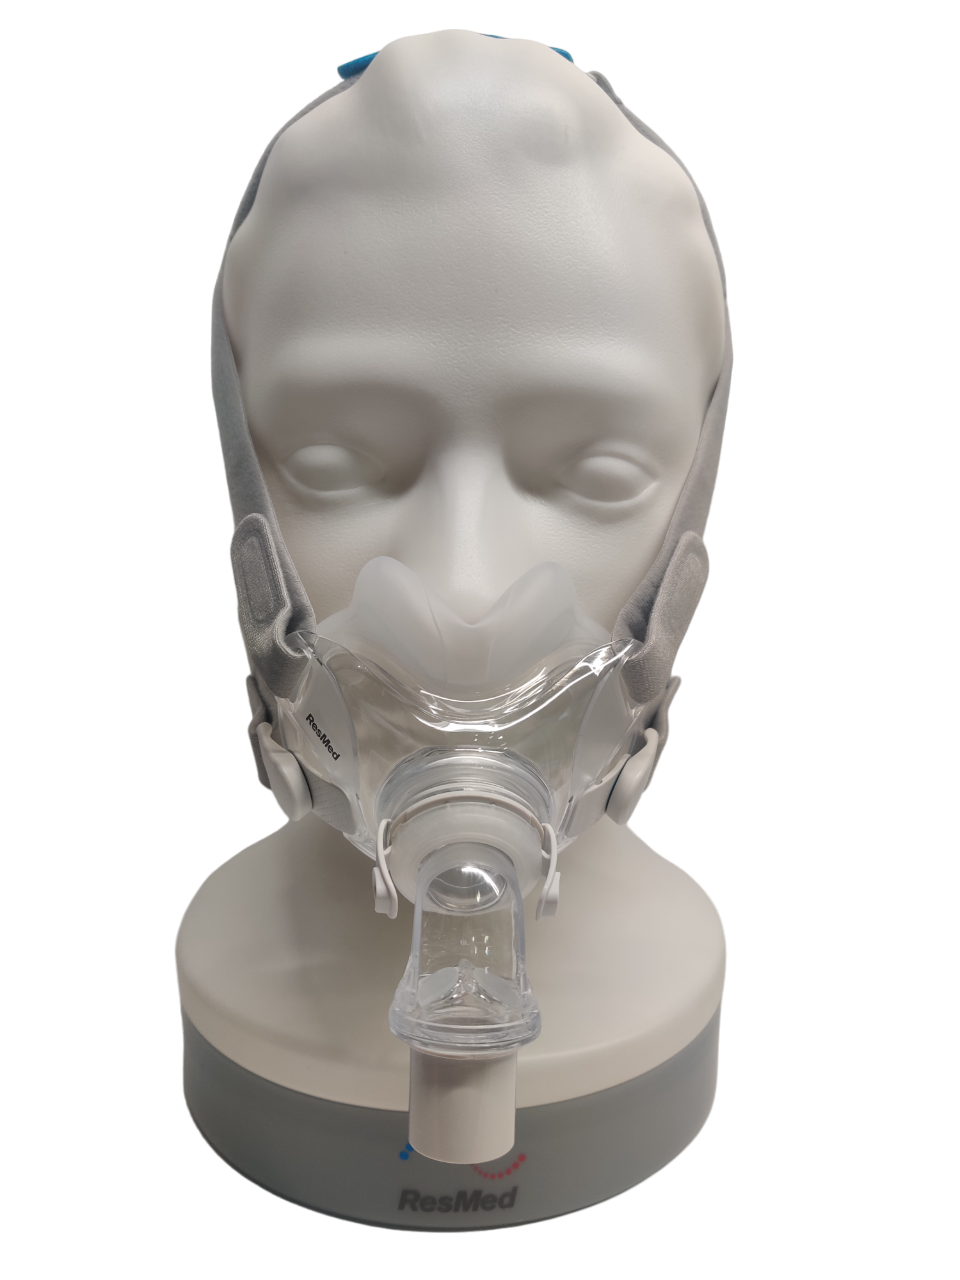 ResMed AirFit F30 Full Face CPAP Interface with Headgear